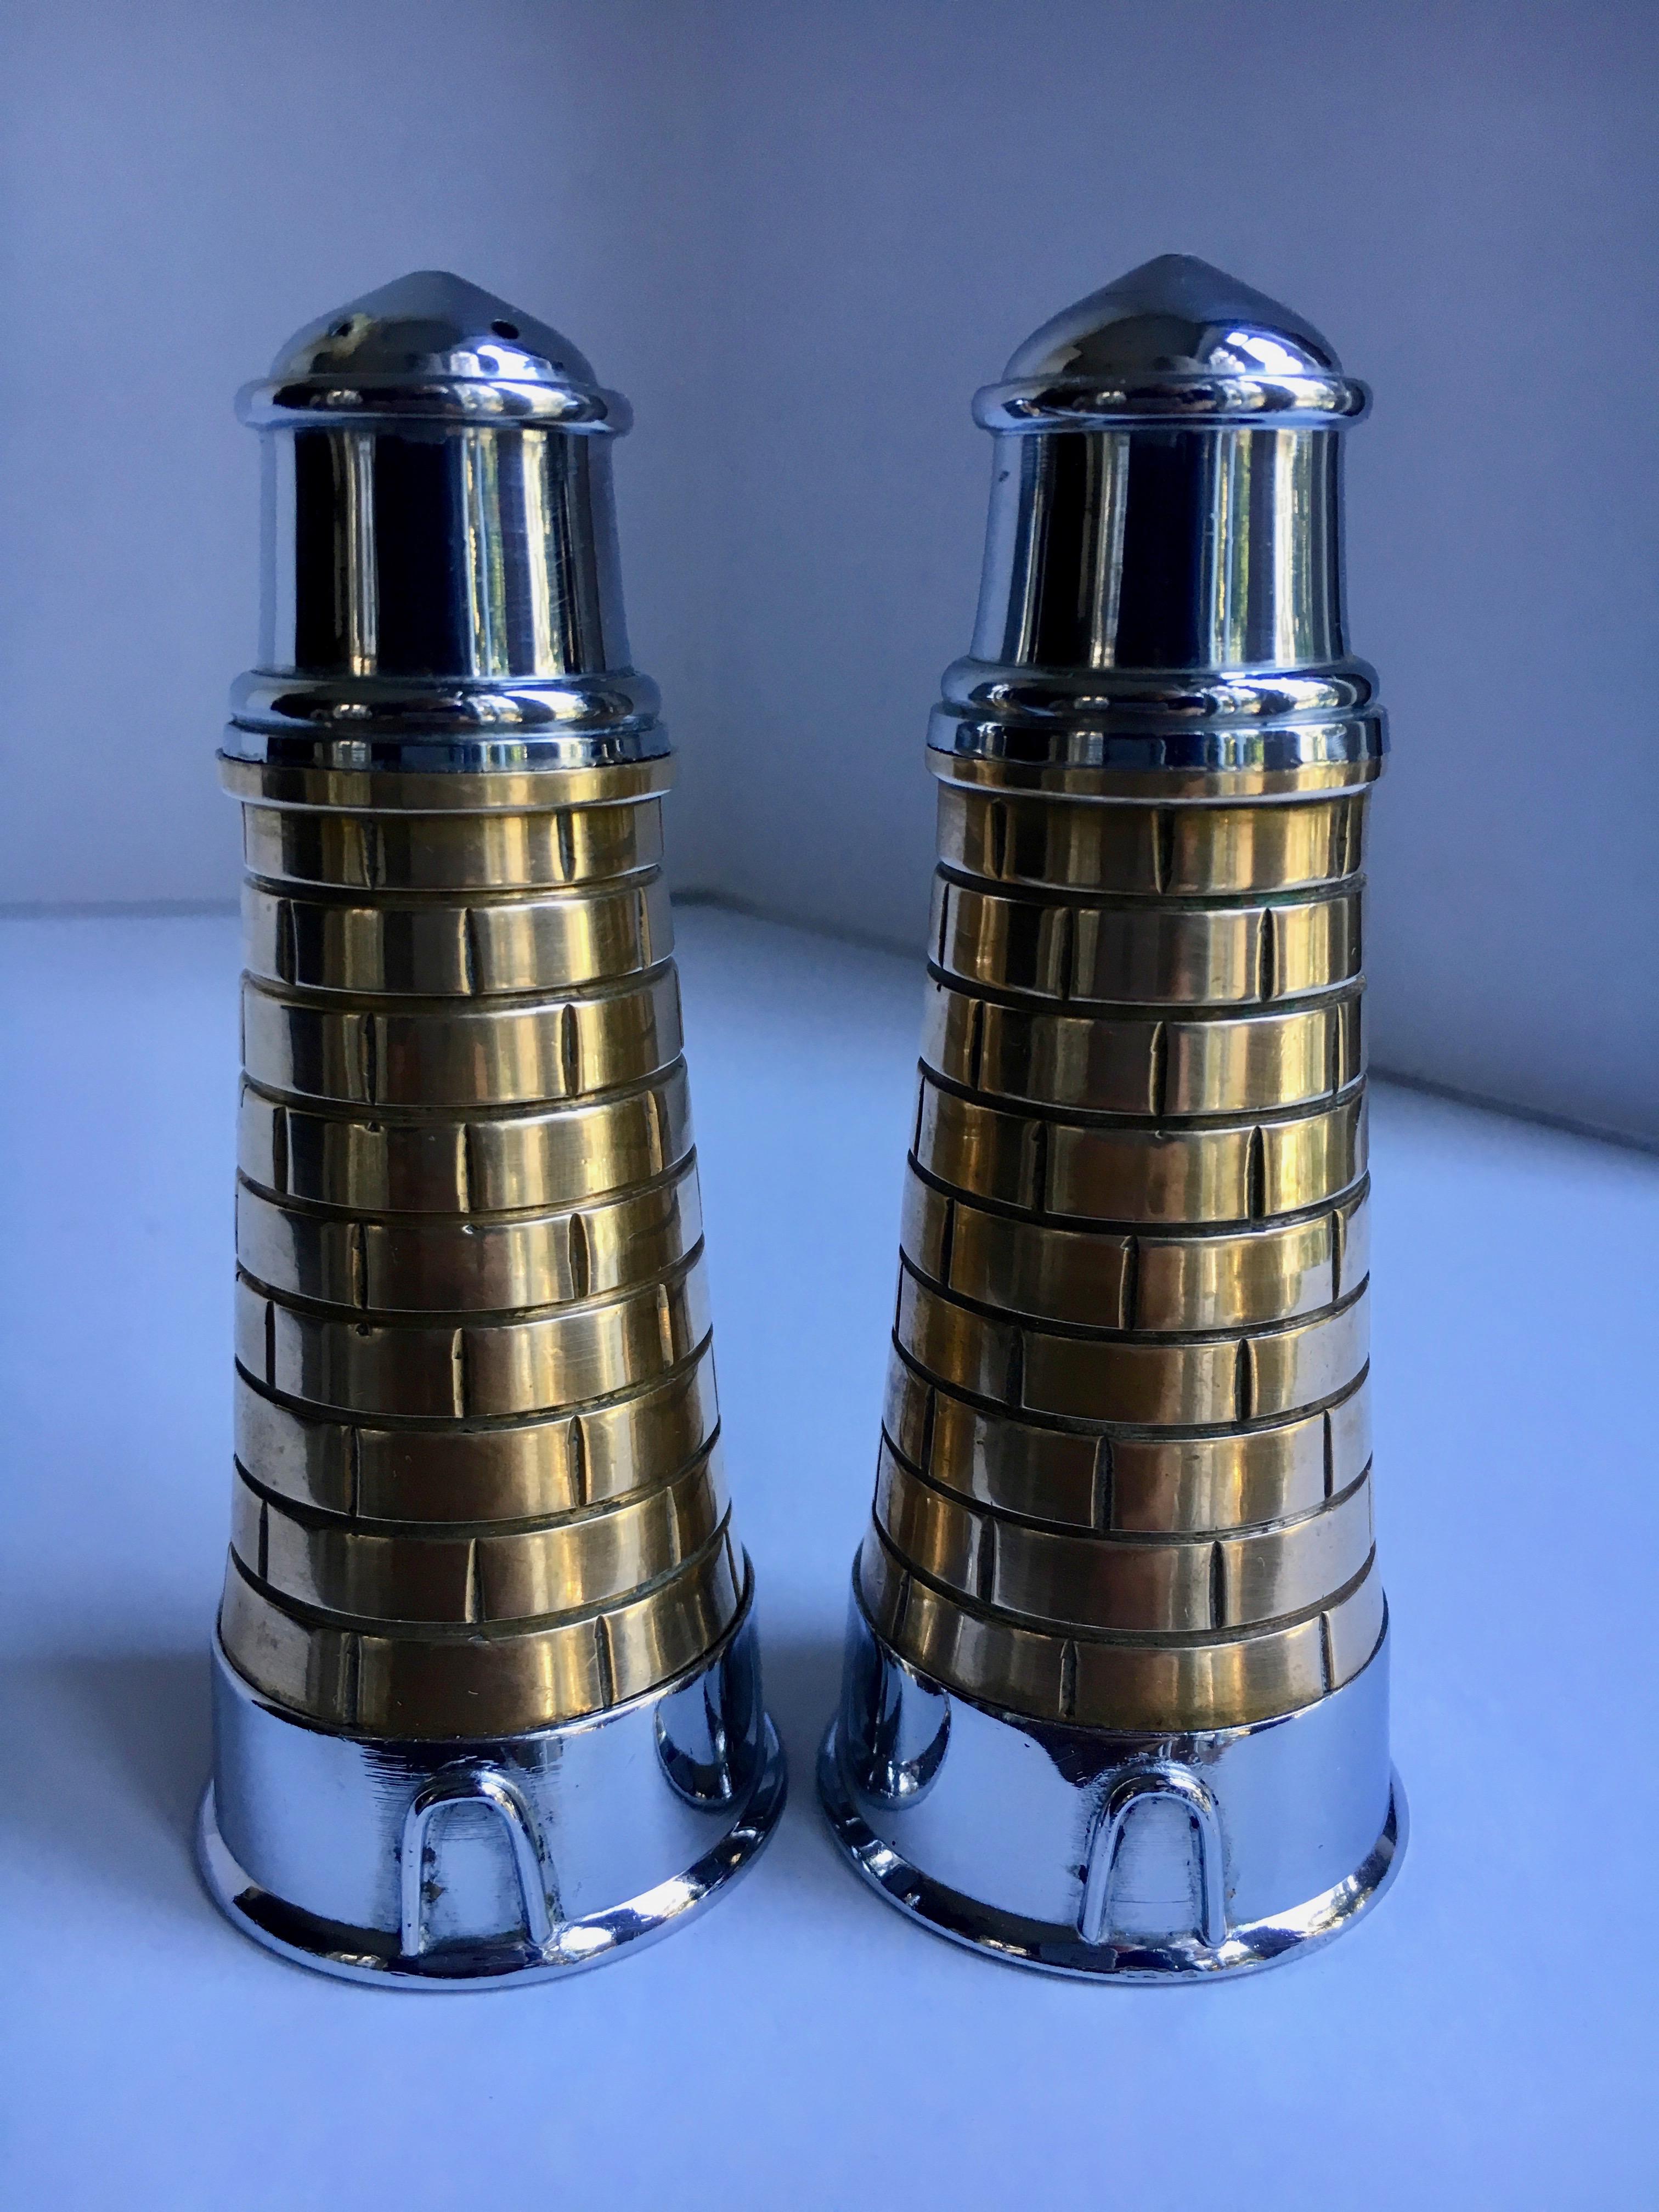 English Lighthouse Salt and Pepper Shakers